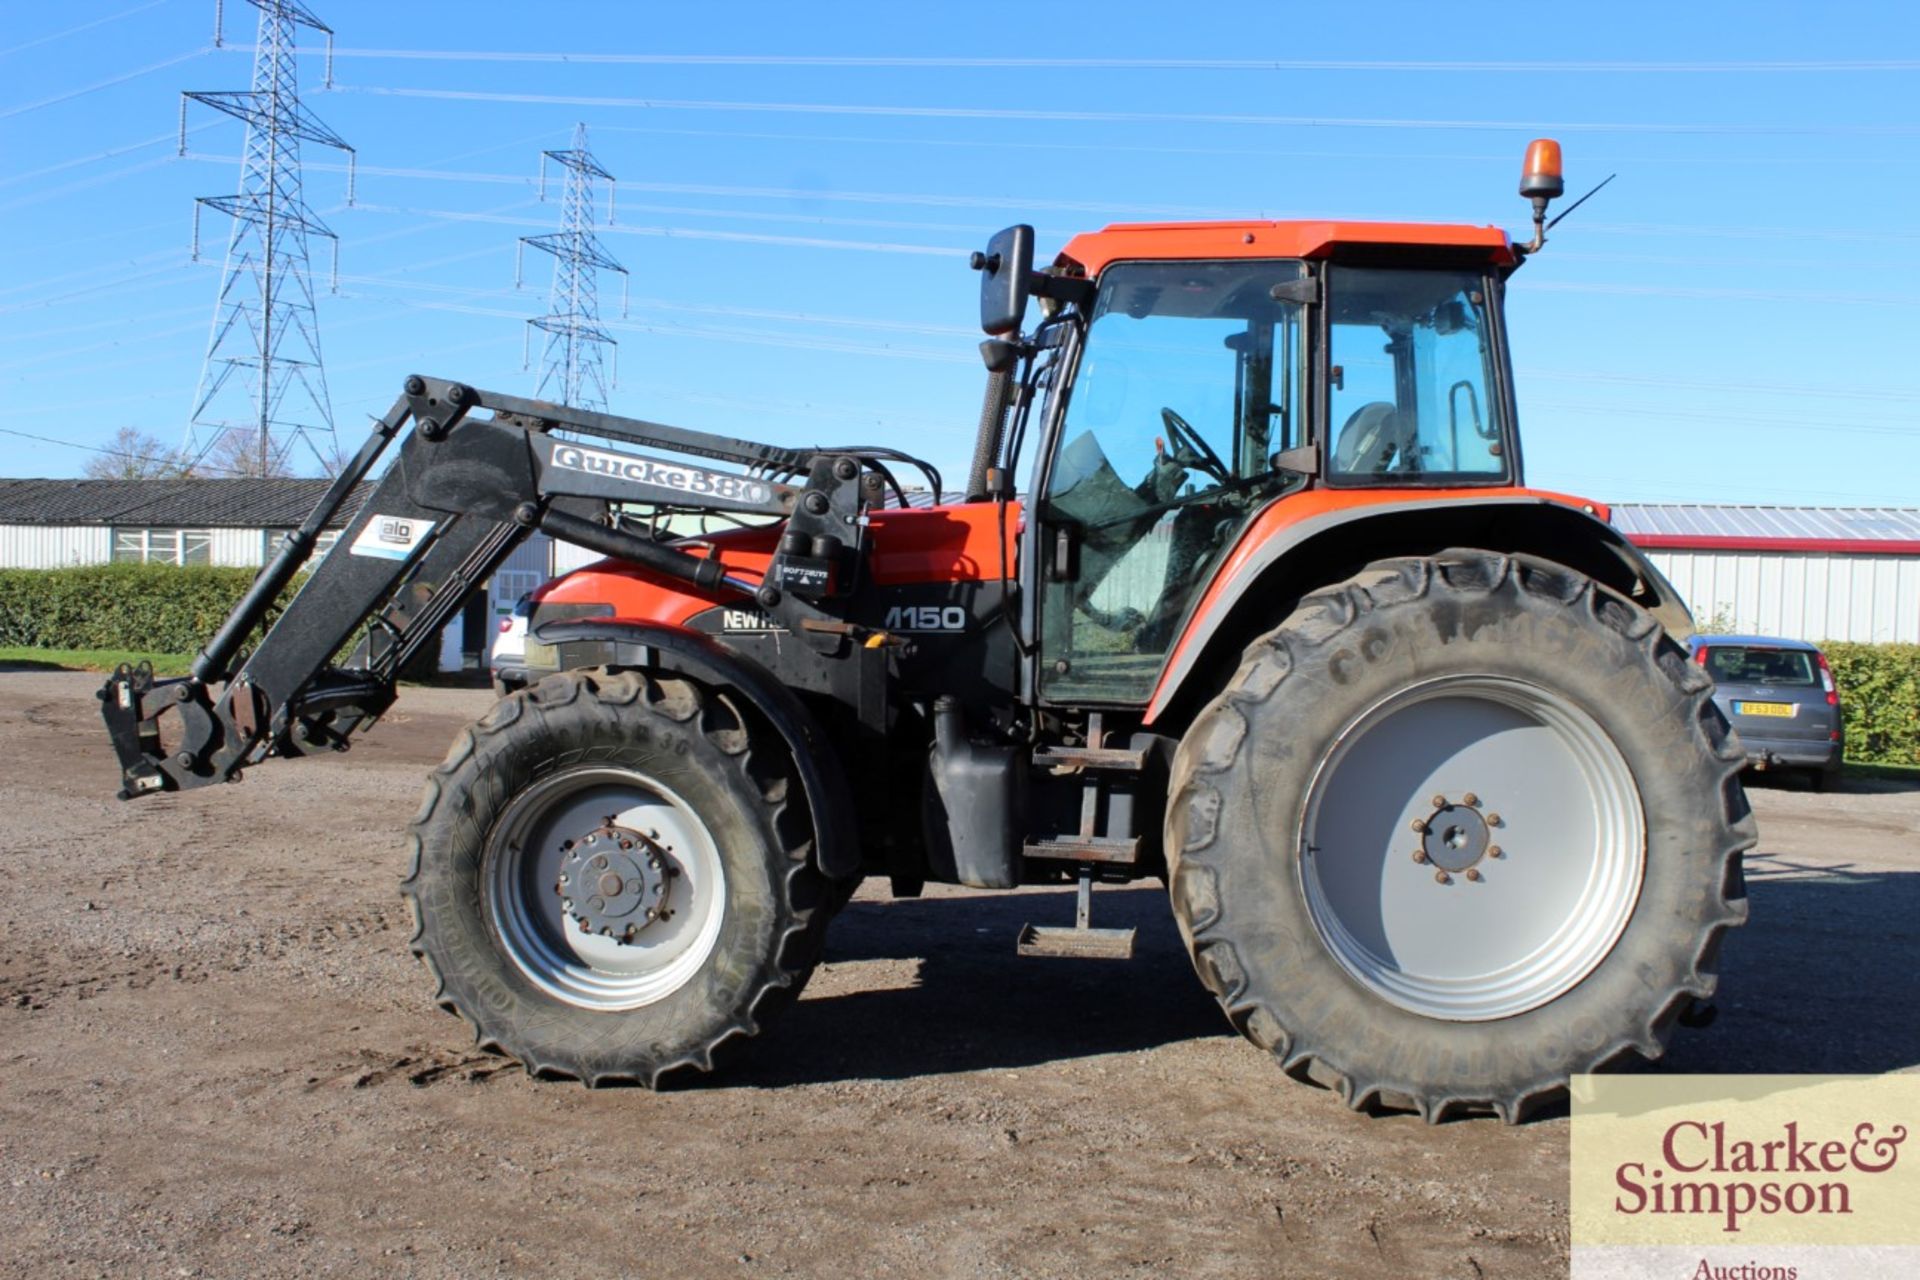 New Holland TM150 4WD tractor. 28/10/2000. 11,839 hours. 520/85R42 rear wheels and tyres @ 60%. - Image 2 of 58